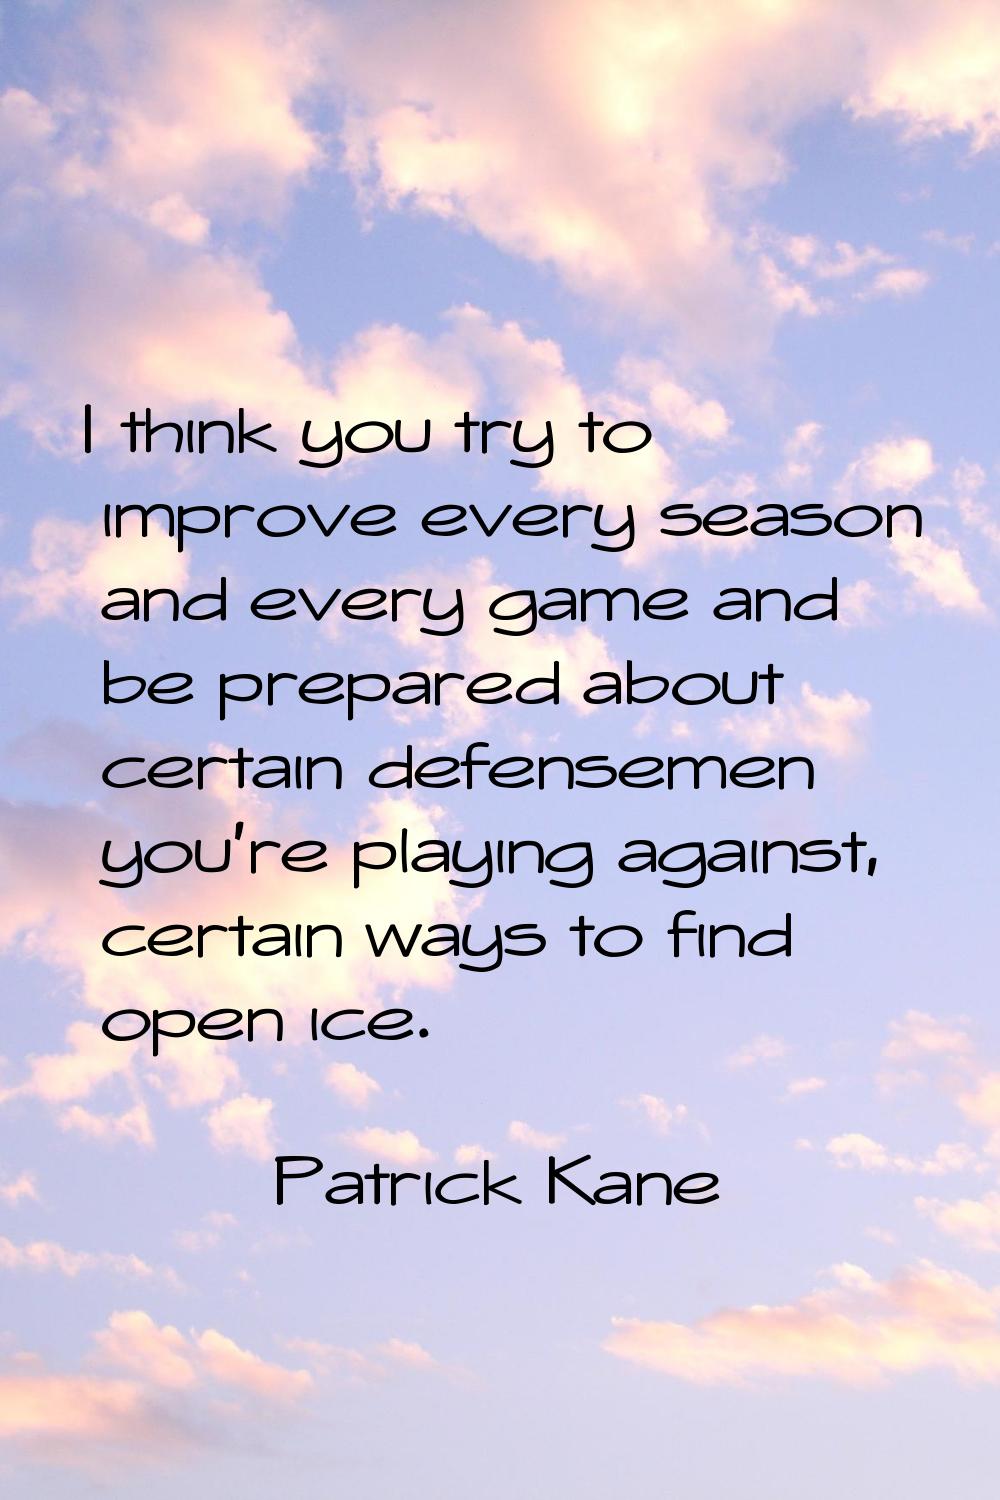 I think you try to improve every season and every game and be prepared about certain defensemen you